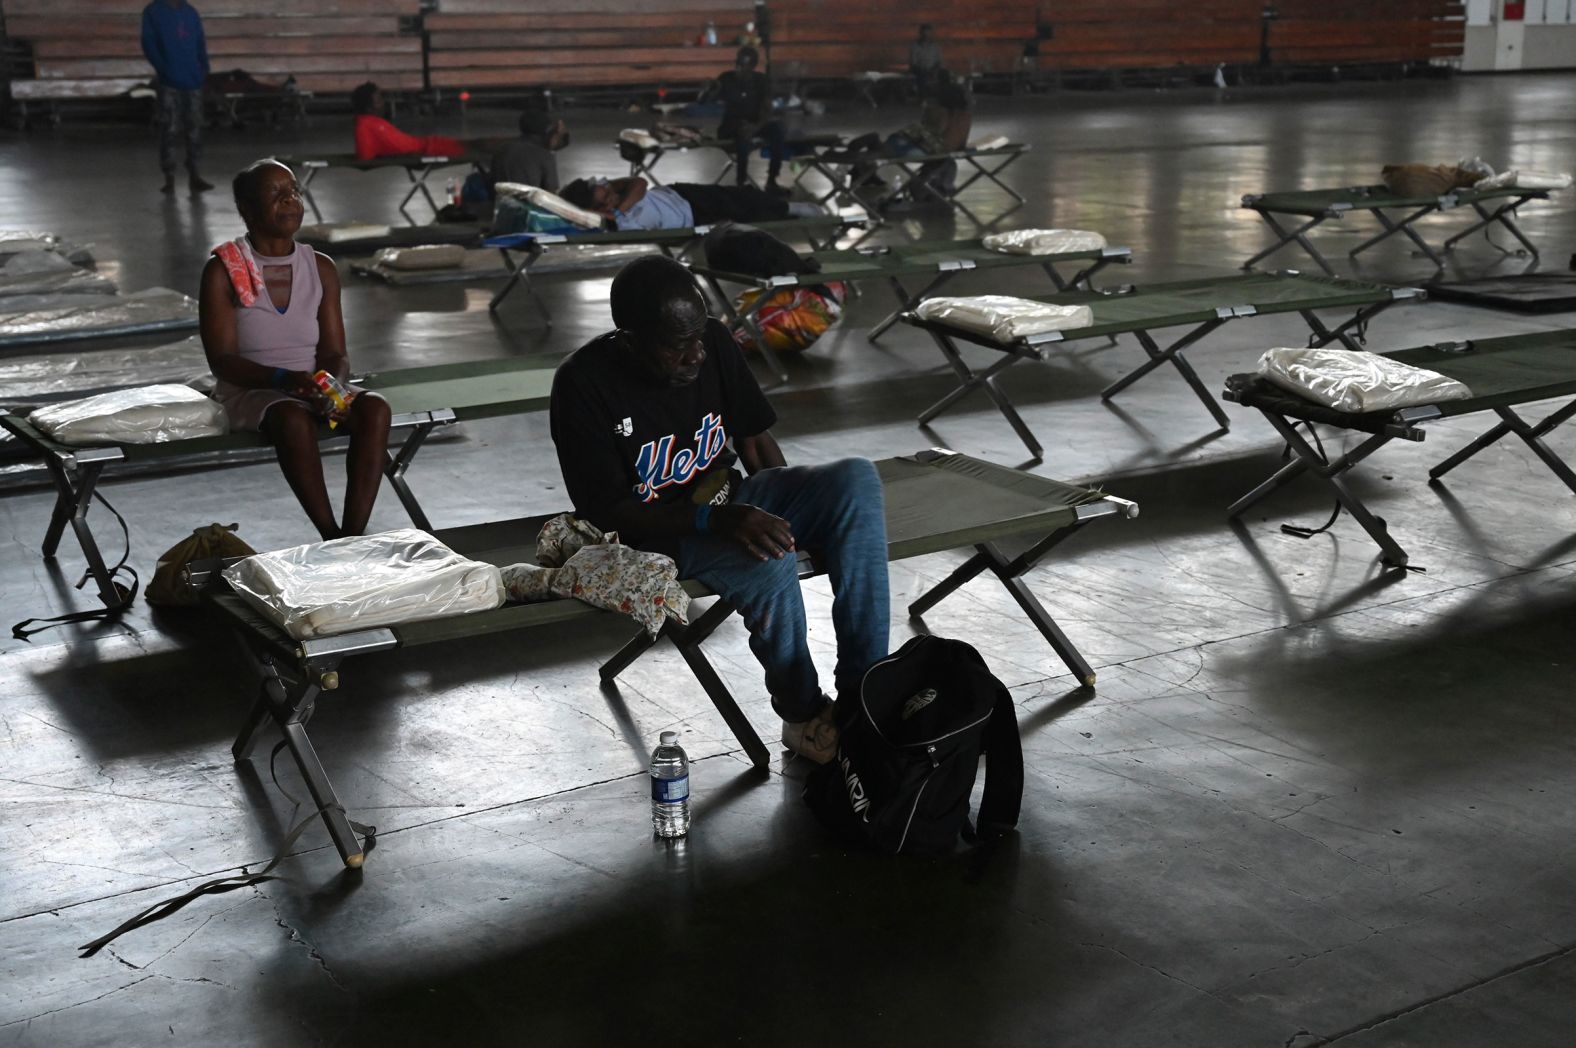 People sit on cots at the National Arena in Kingston, Jamaica, which was serving as a shelter in the aftermath of Hurricane Beryl on Thursday, July 4.